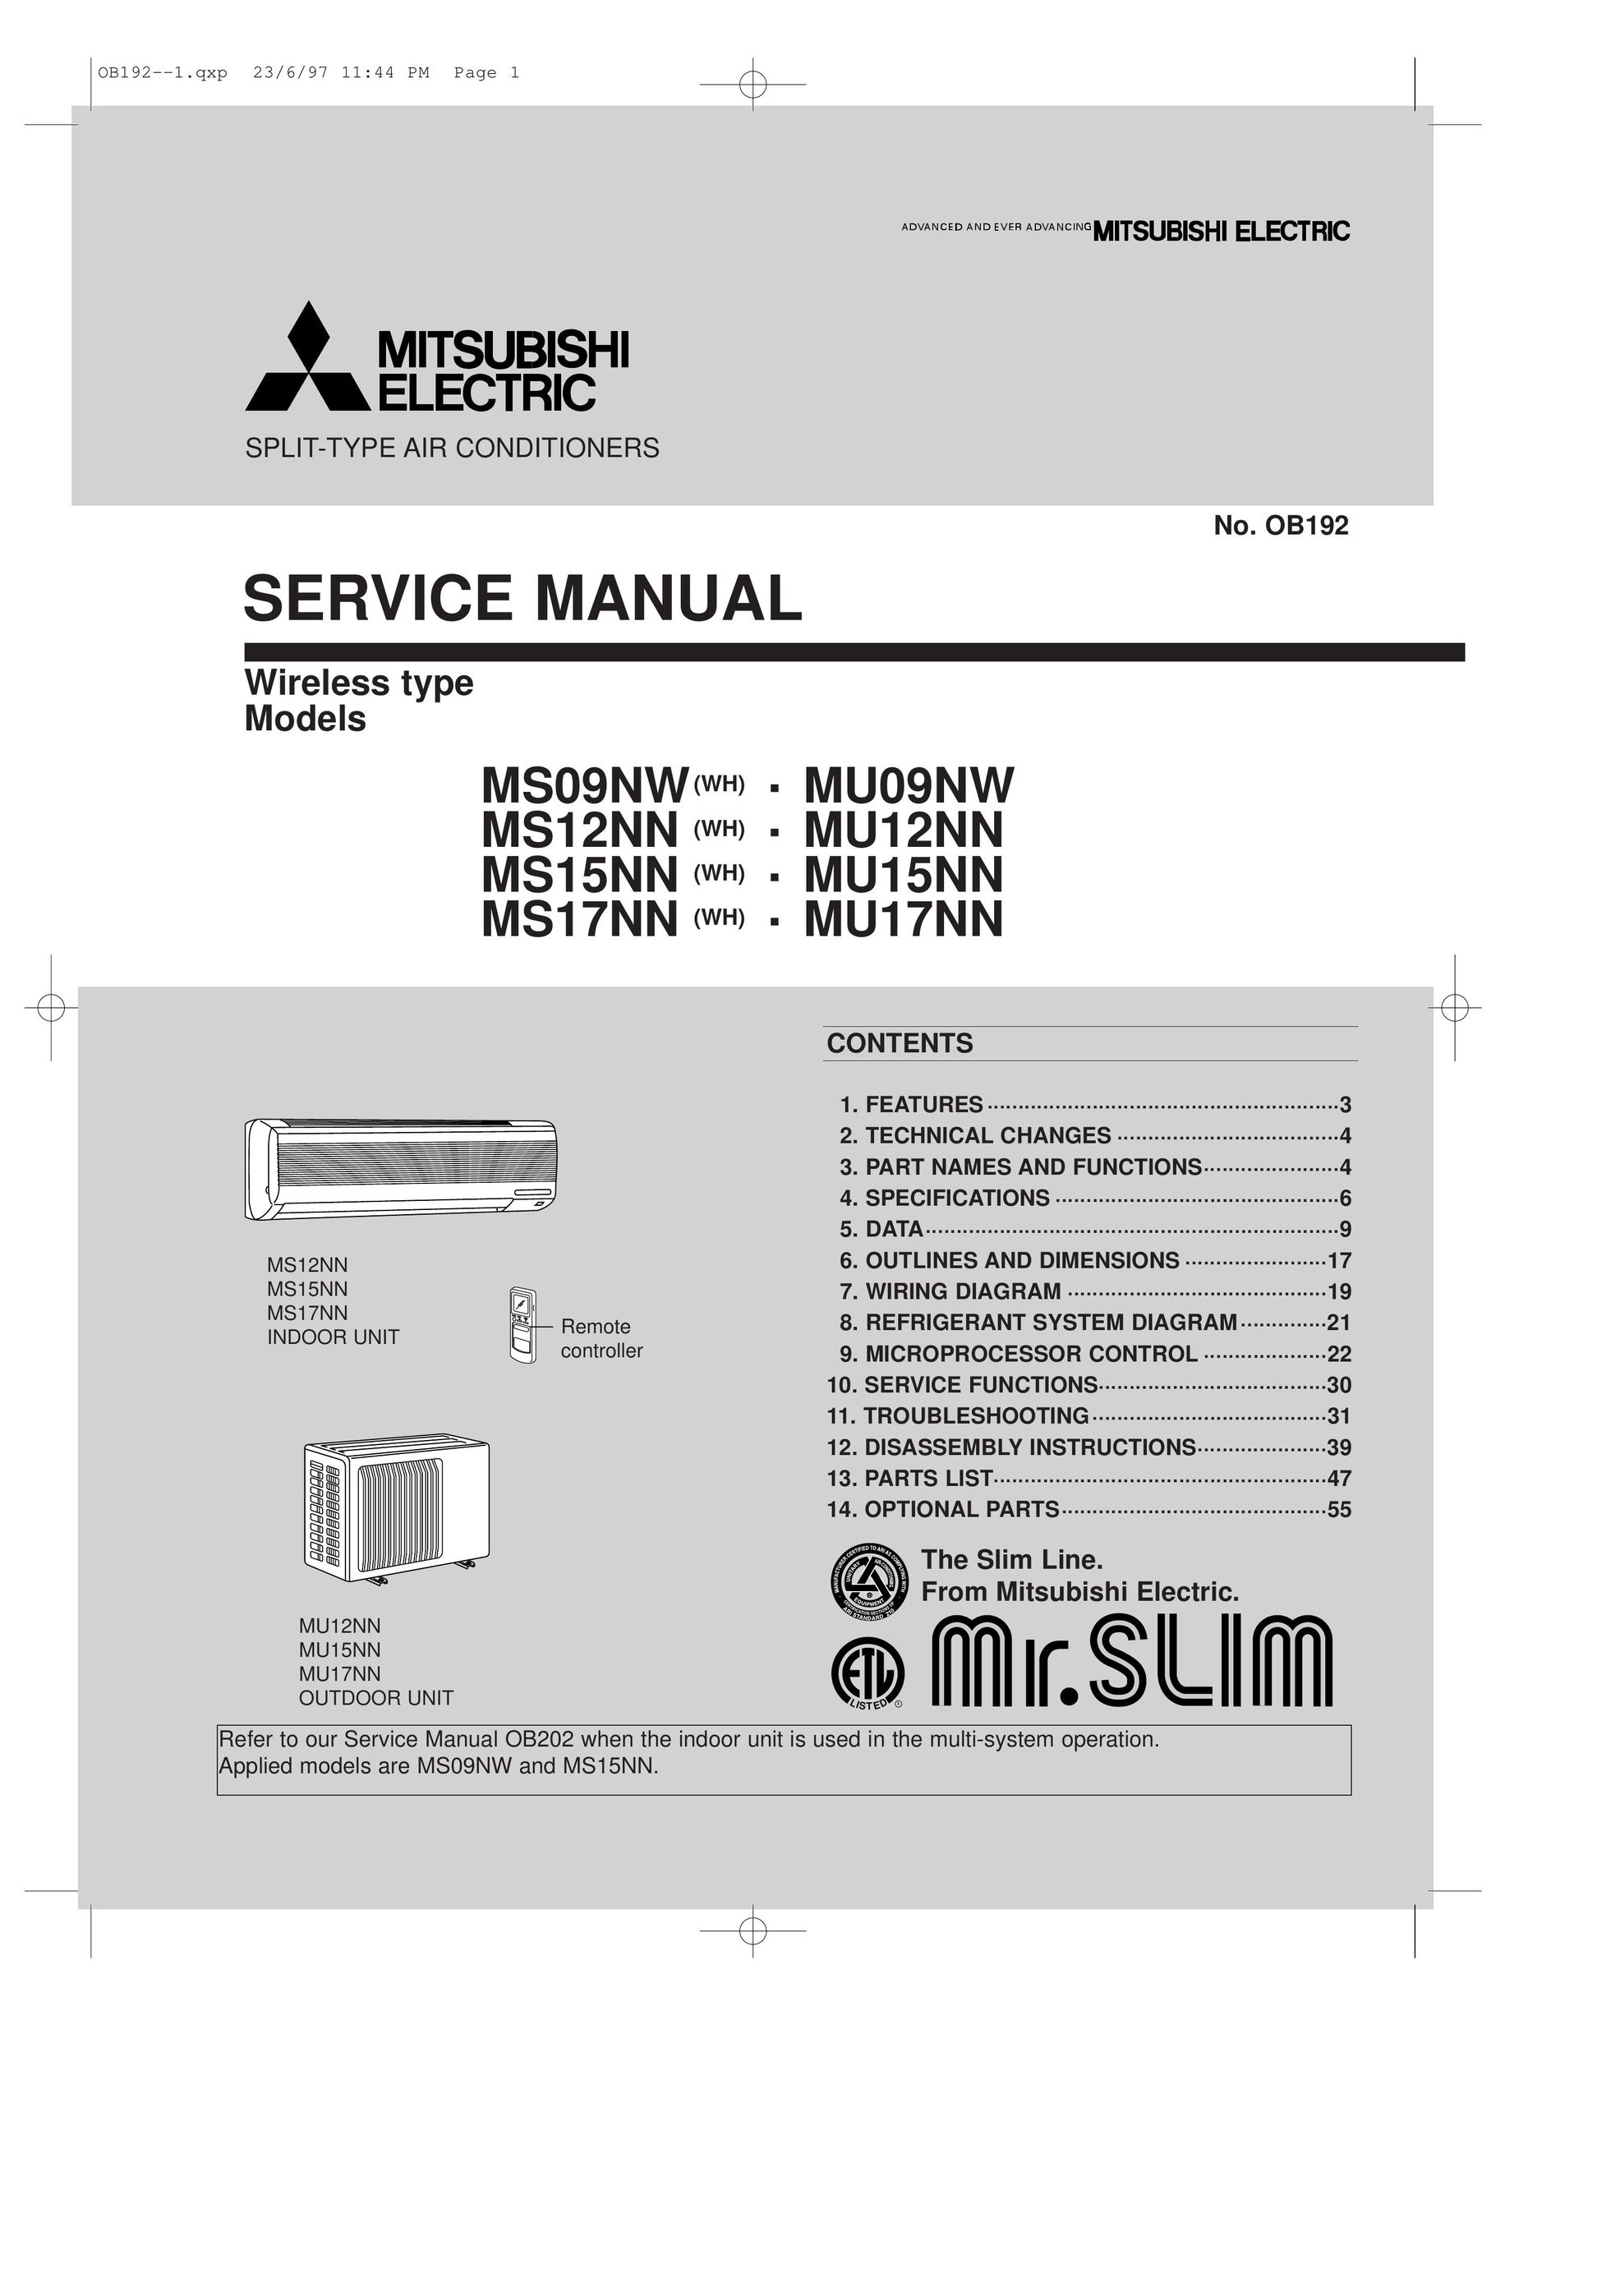 Mitsumi electronic MS17NN (WH) Air Conditioner User Manual